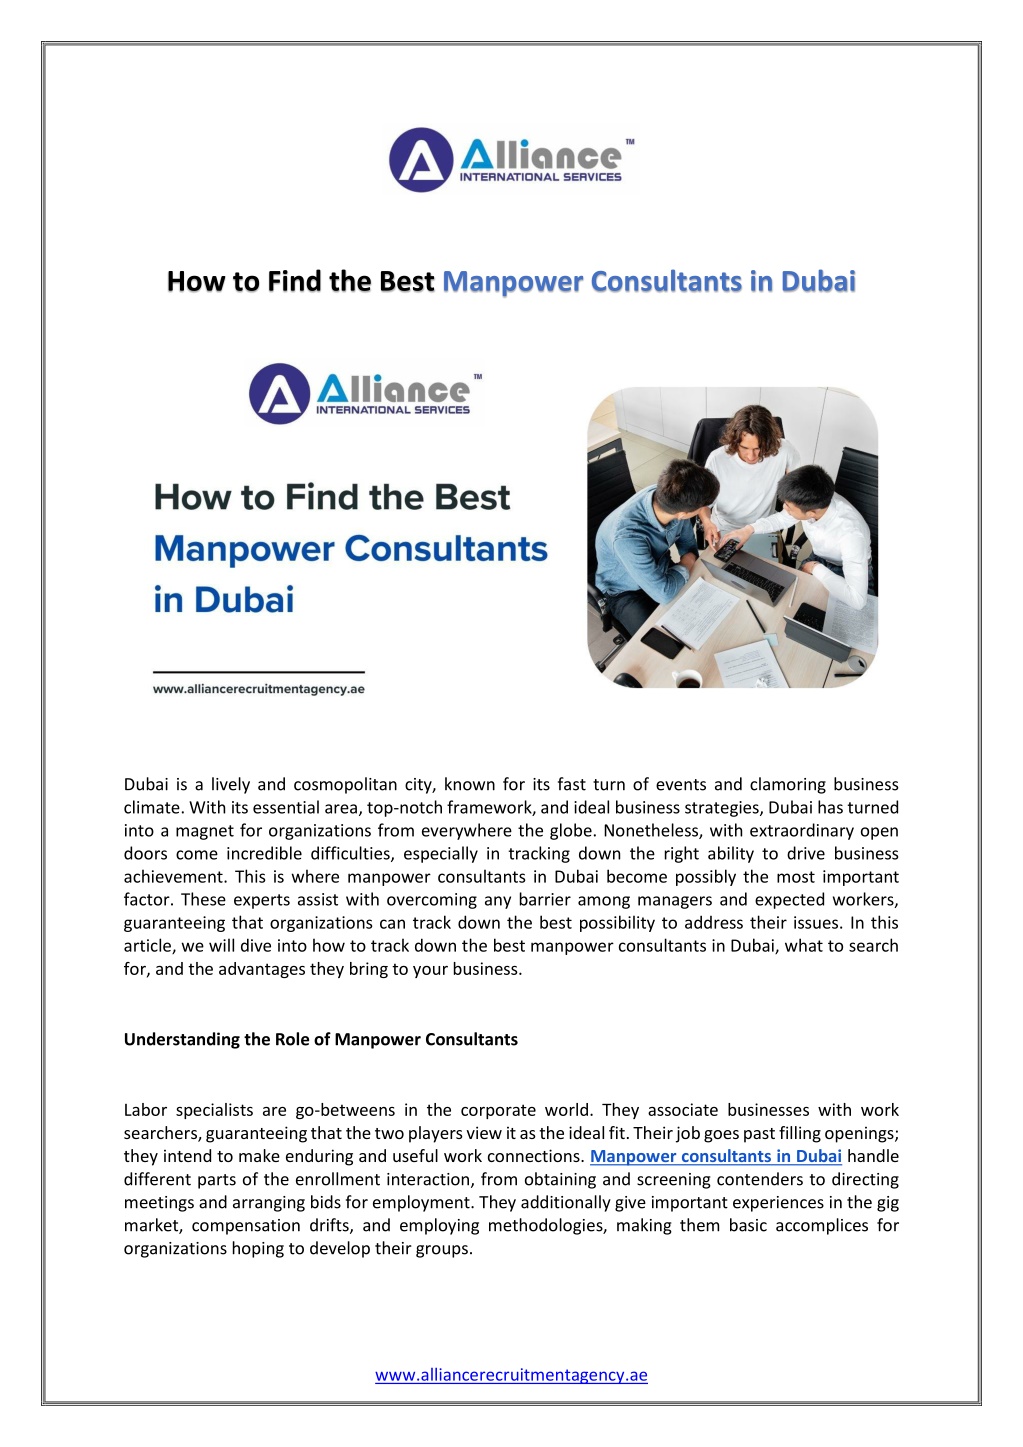 how to find the best manpower consultants in dubai l.w